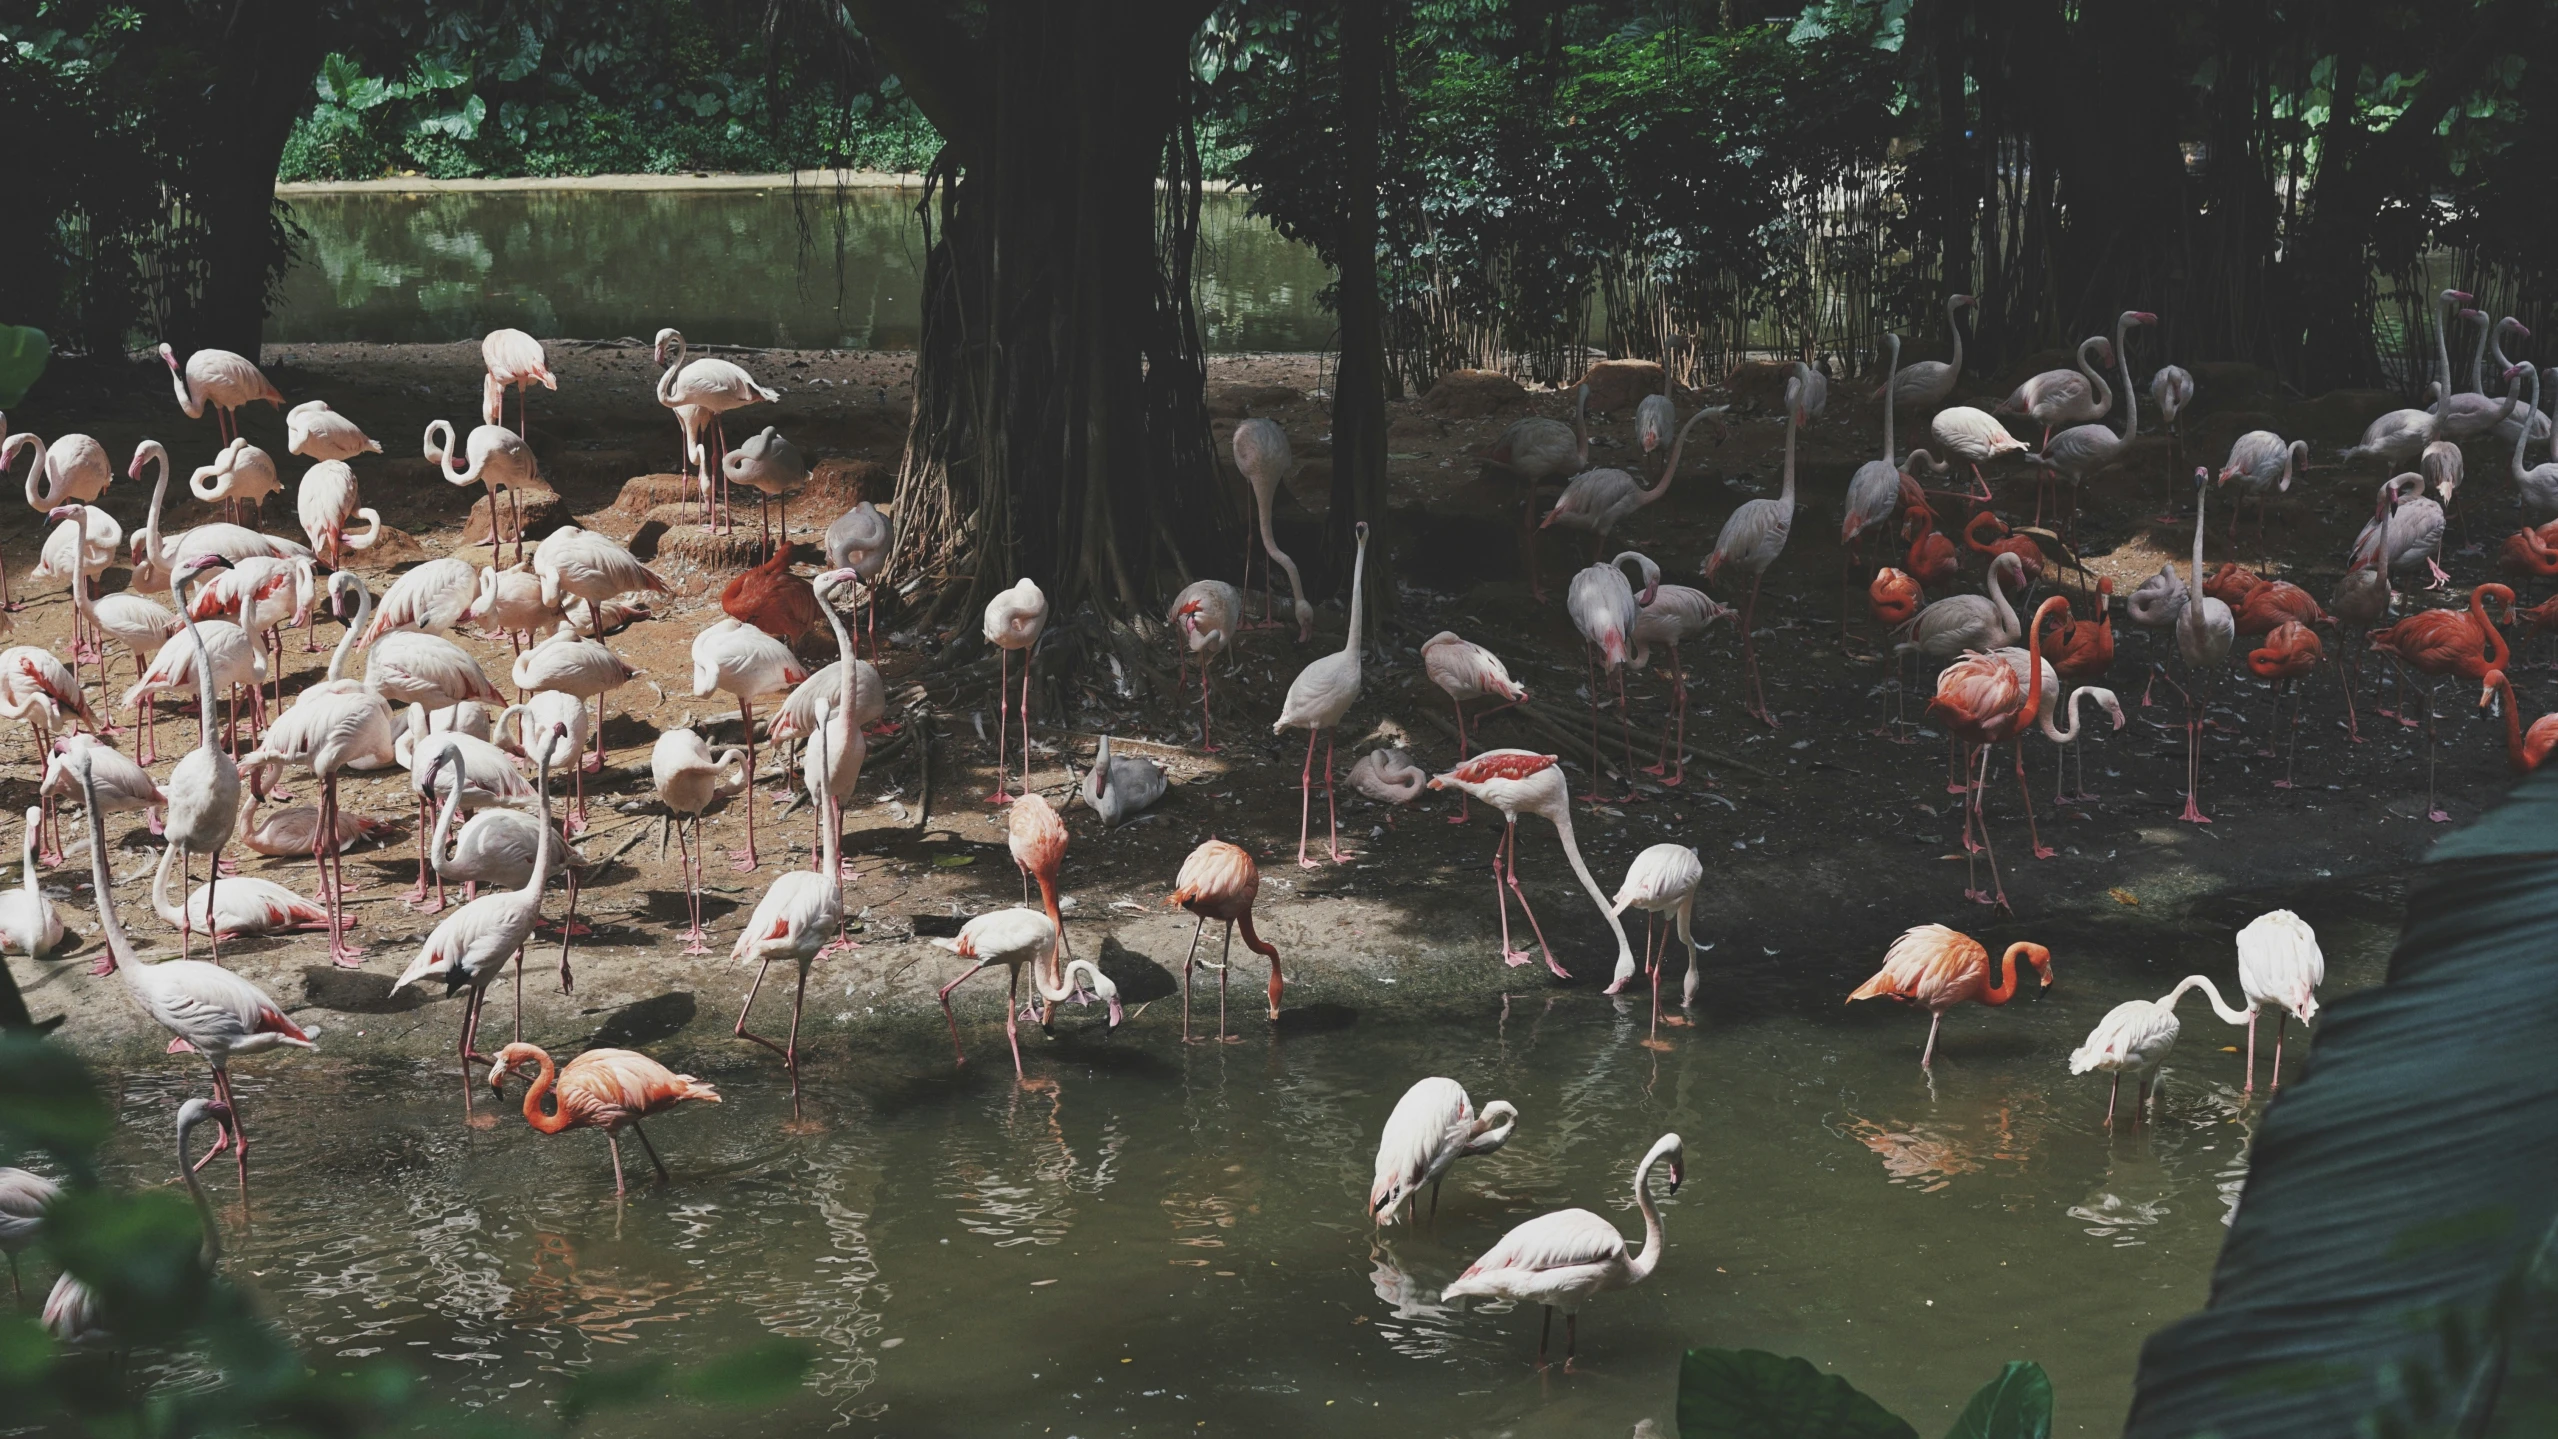 the flamingos are all wading in the water